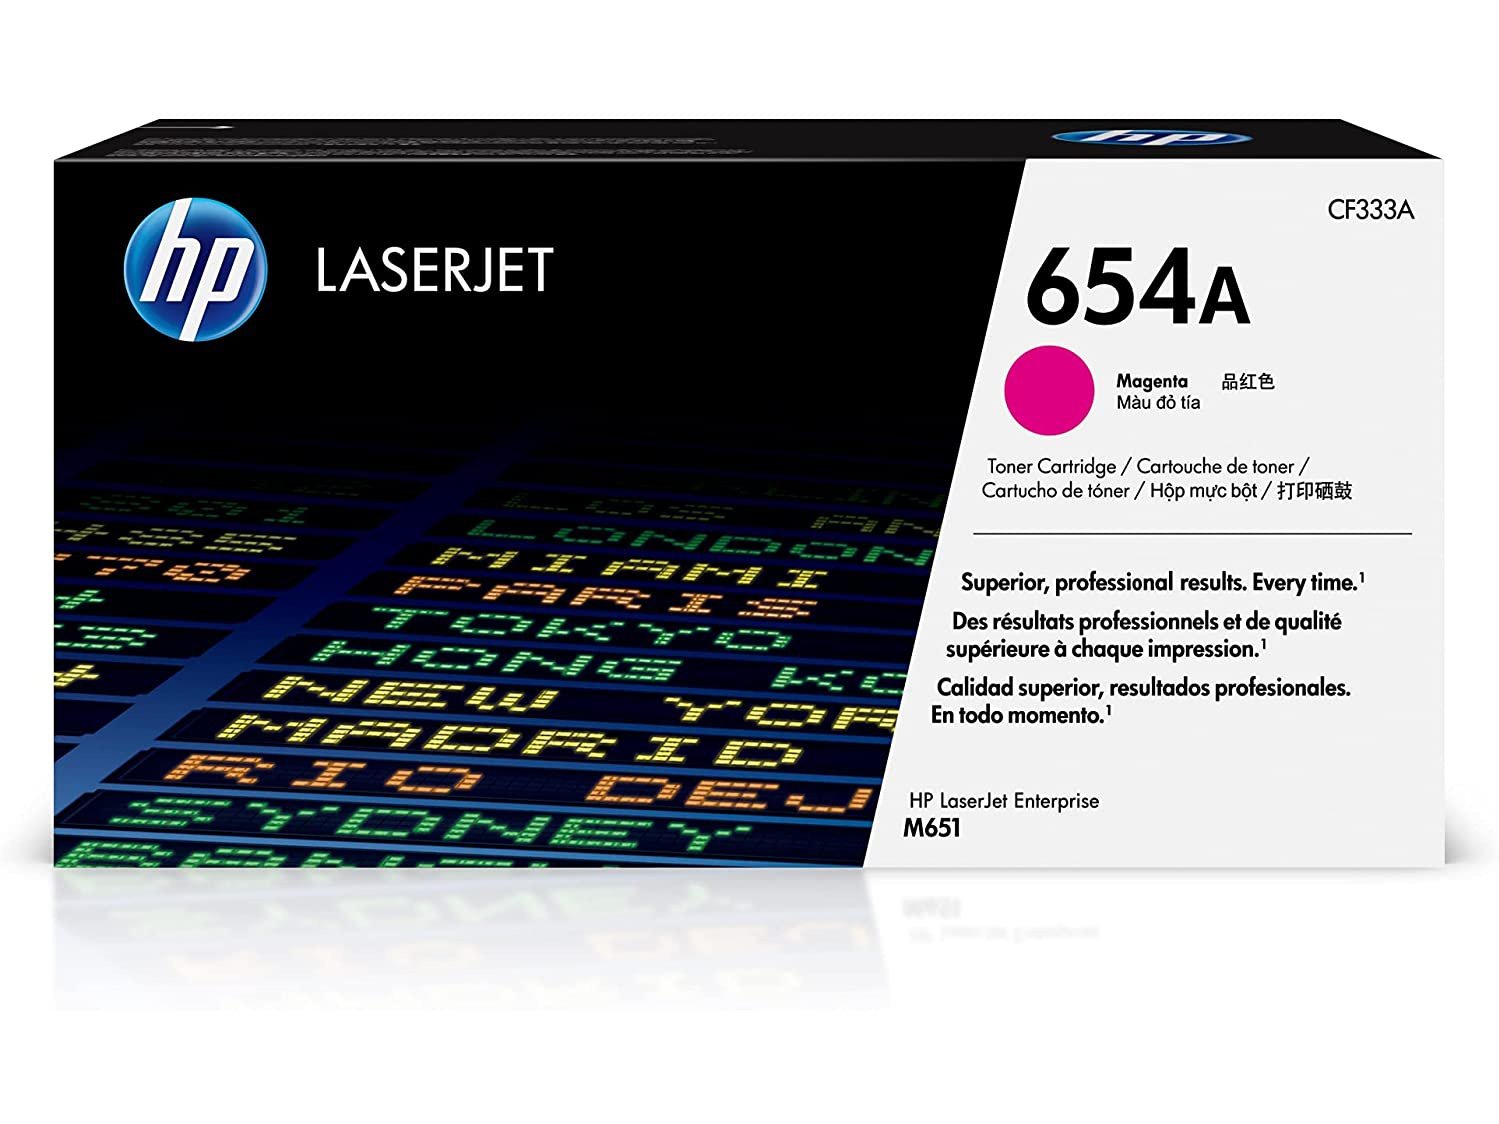 ICU Compatible/ OEM Get HP ICUCF333A Yields 15000 Pages Compatible 654A Magenta CF333A Laser Toner Cartridge for Hewlett Packard Printers